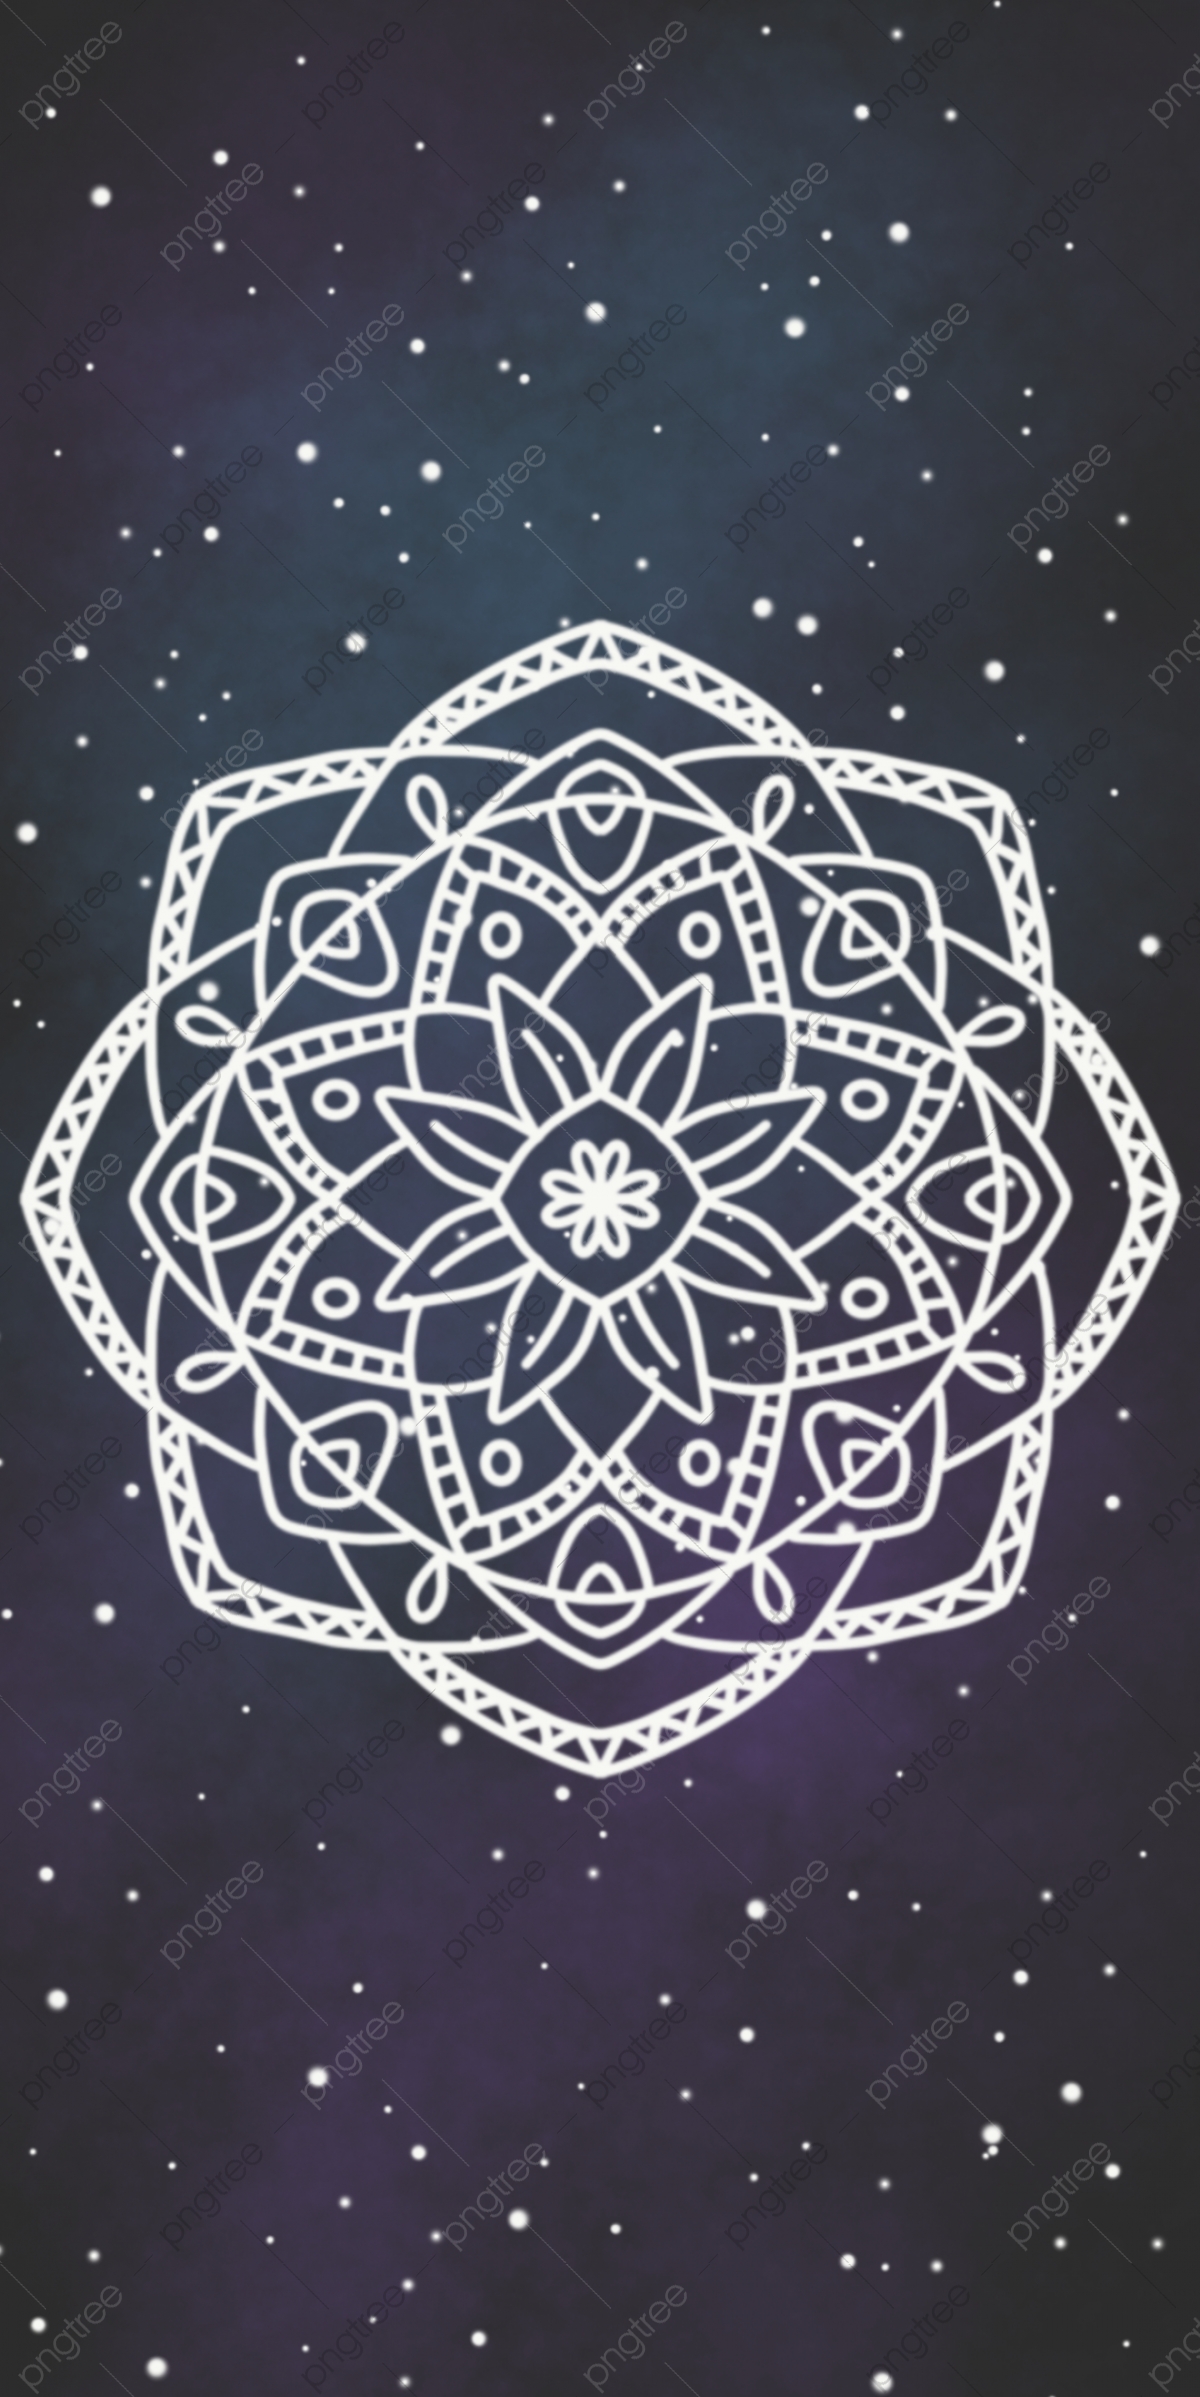 Dark Space Sky With White Outline Mandala Wallpaper Background, Mandala Wallpaper, Indian Mandala, Mandala Phone Wallpaper Background Image for Free Download